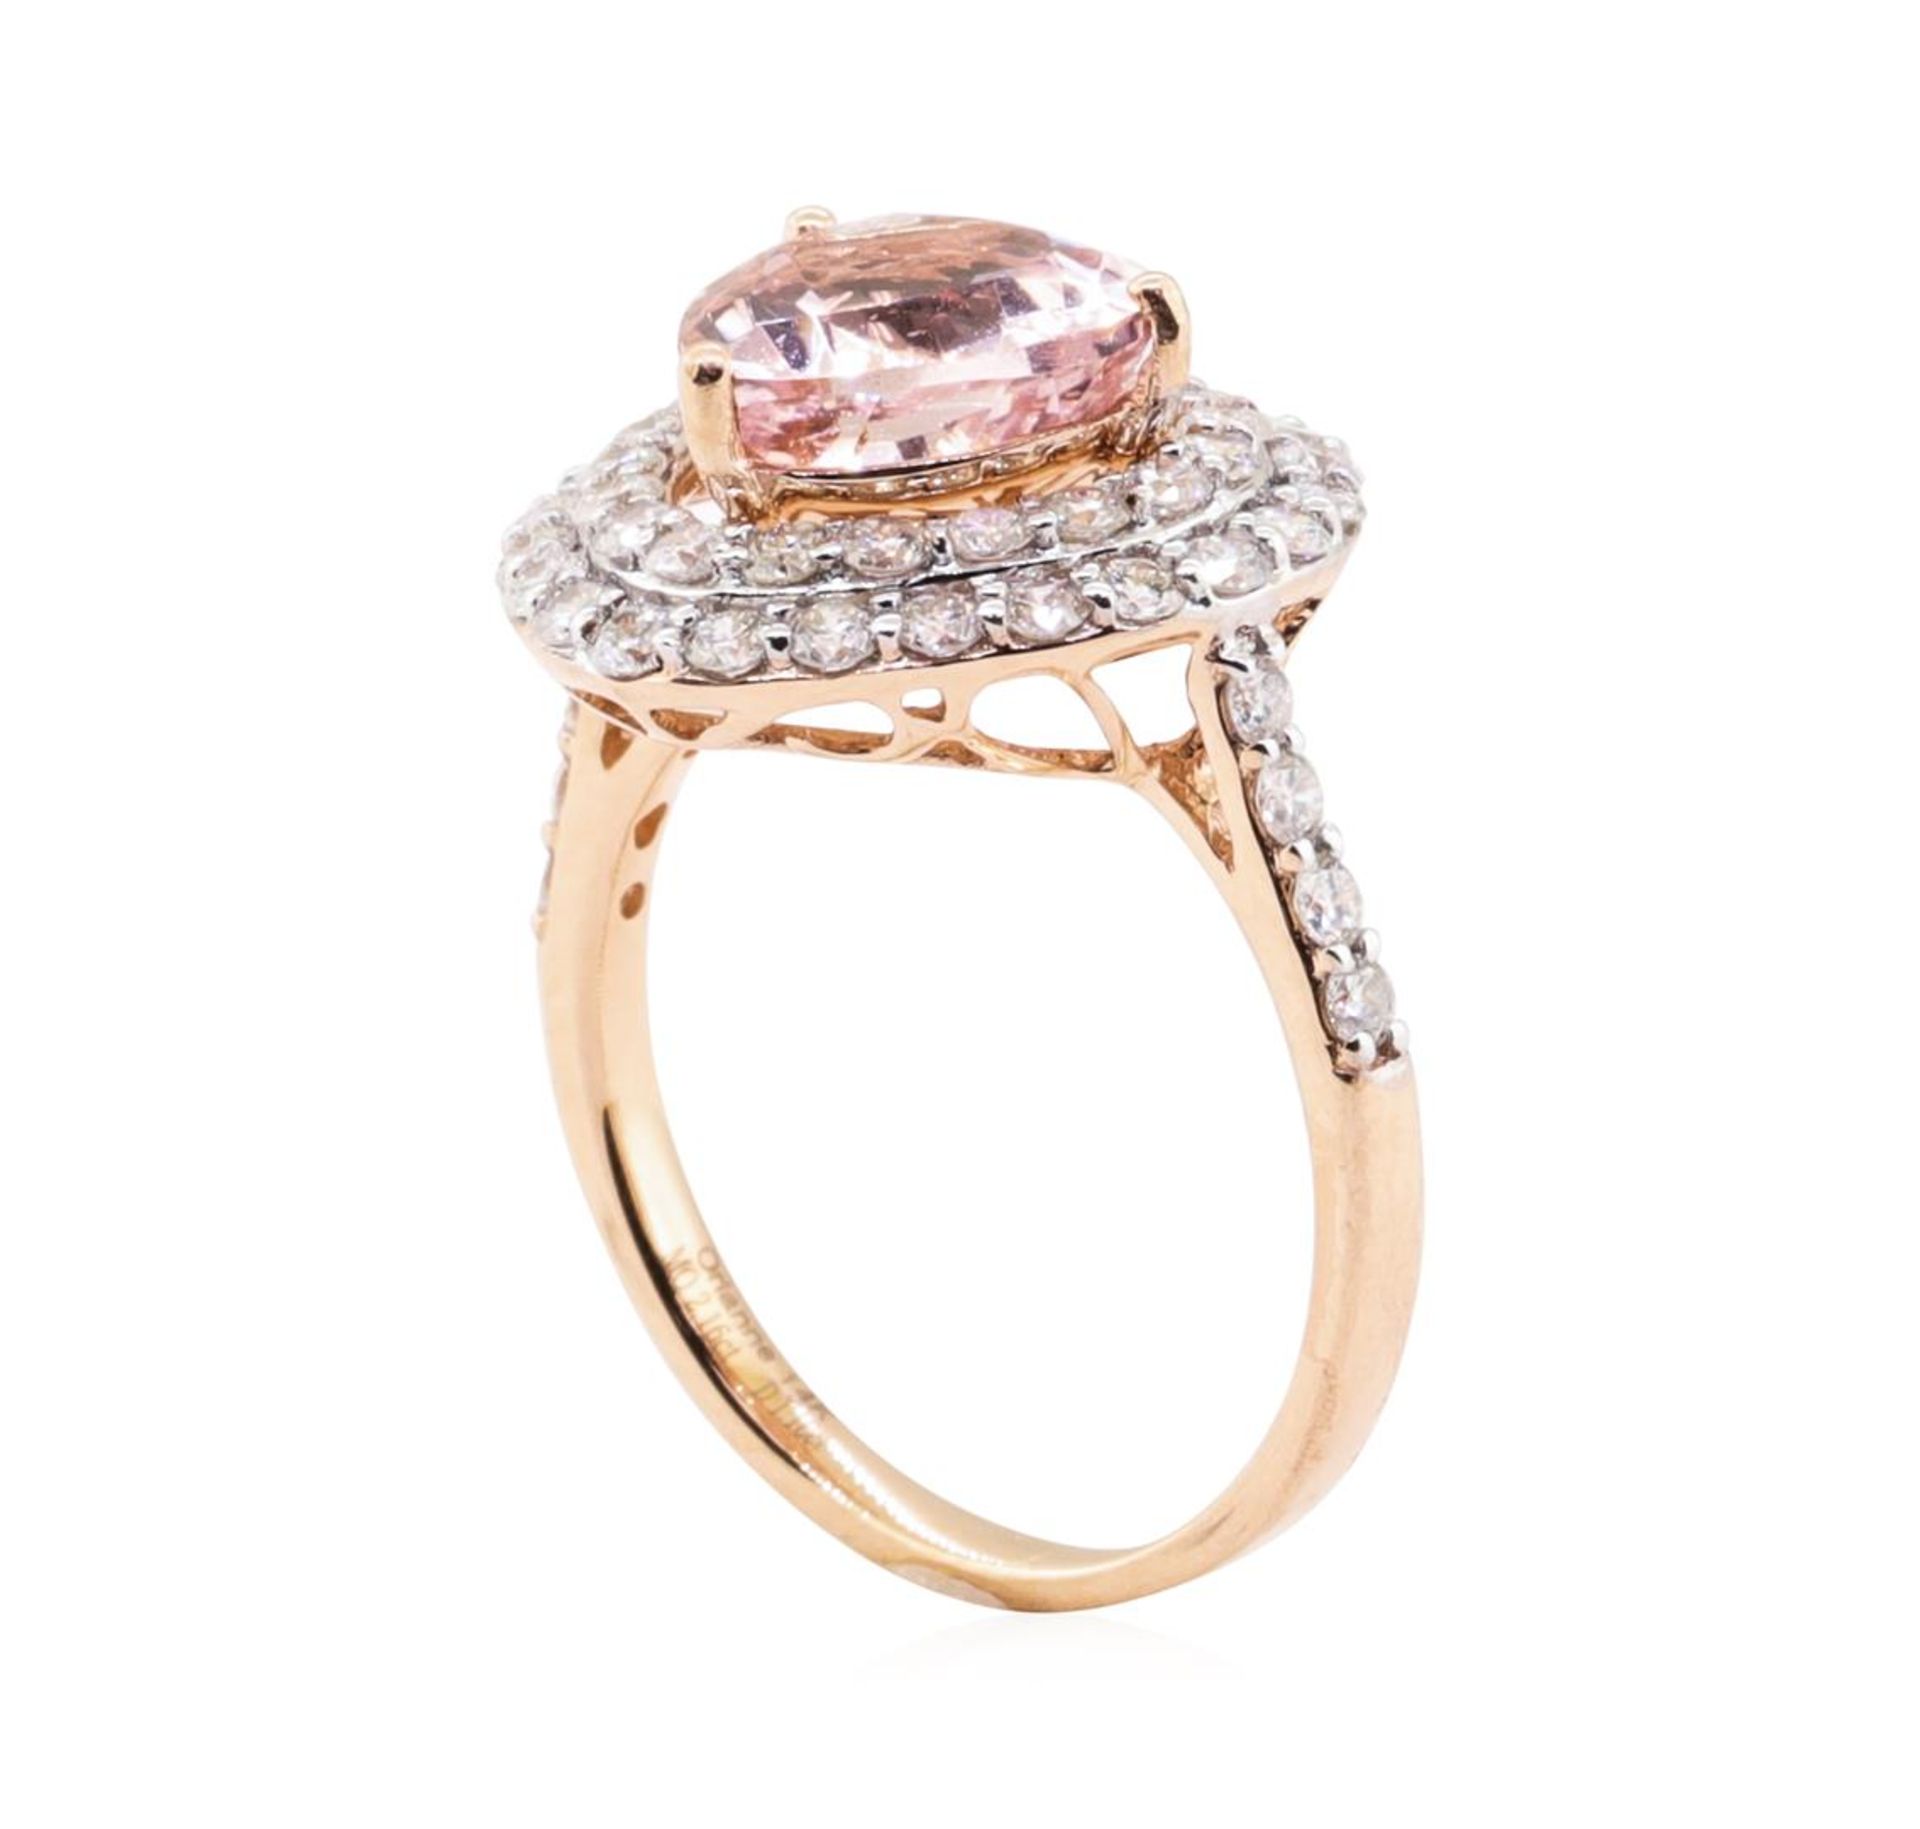 2.16 ctw Morganite and Diamond Ring - 14KT Rose Gold - Image 4 of 5